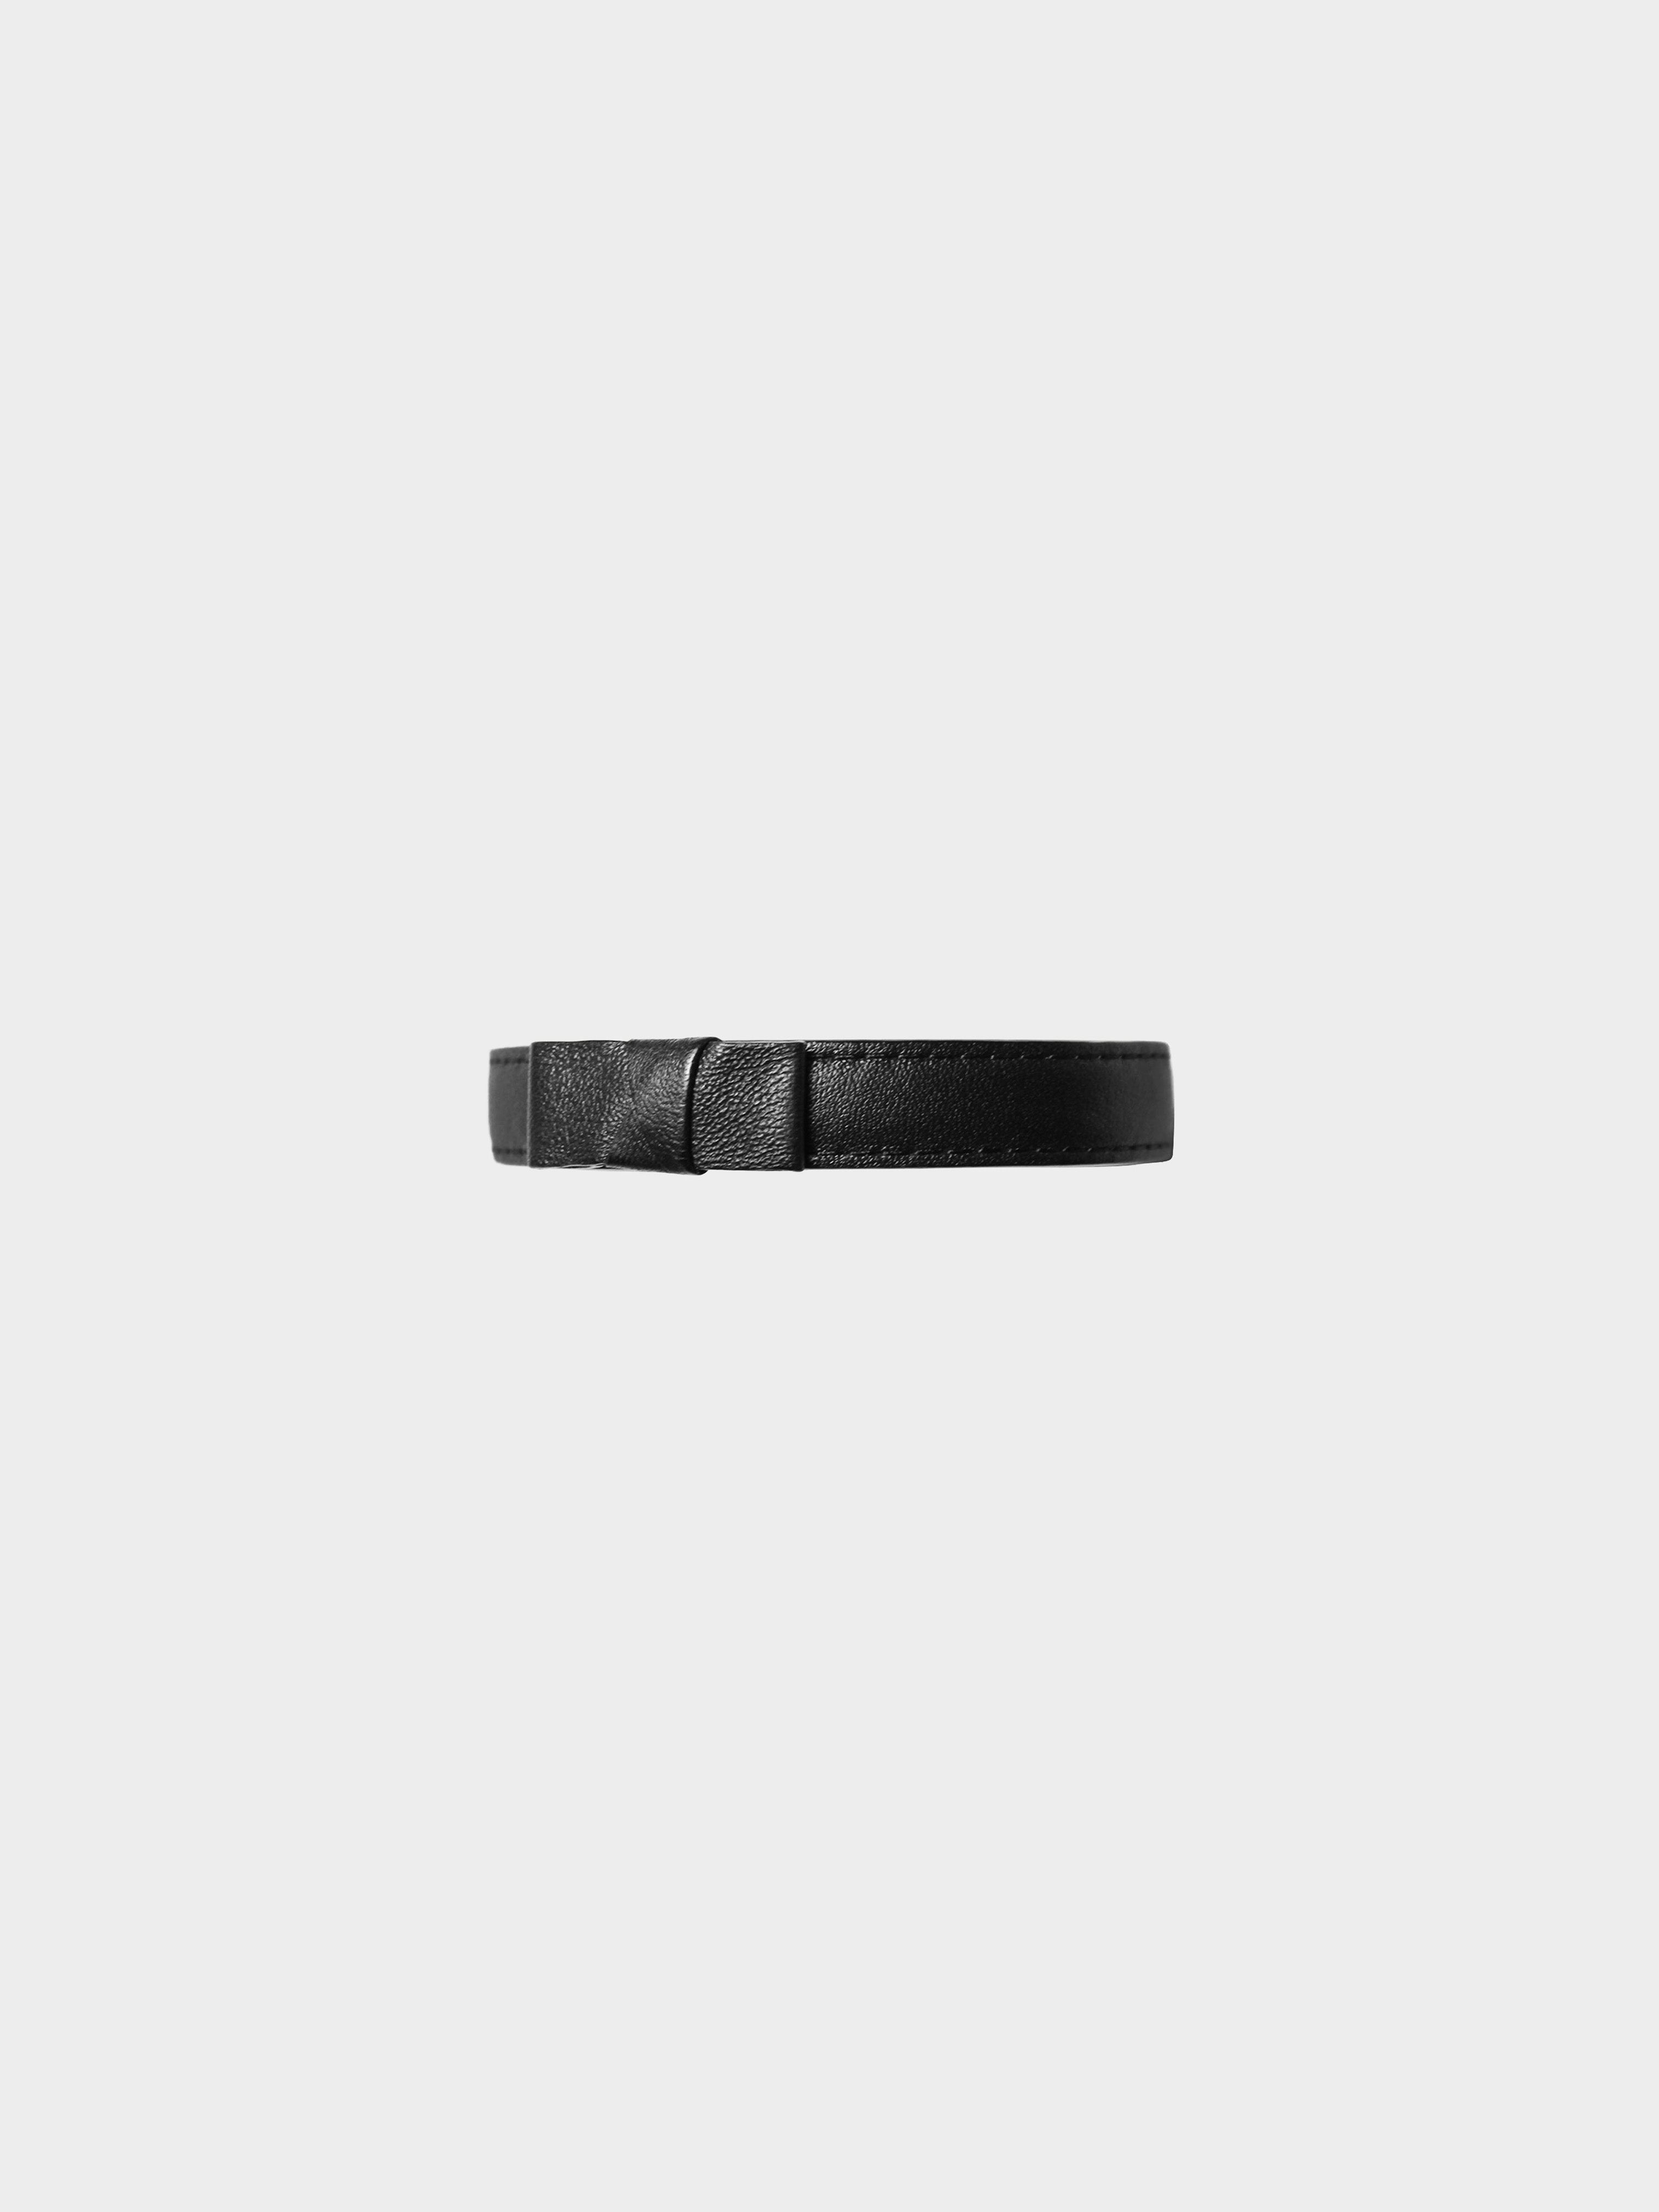 Christian Dior Homme SS 2006 Black Leather Bangle